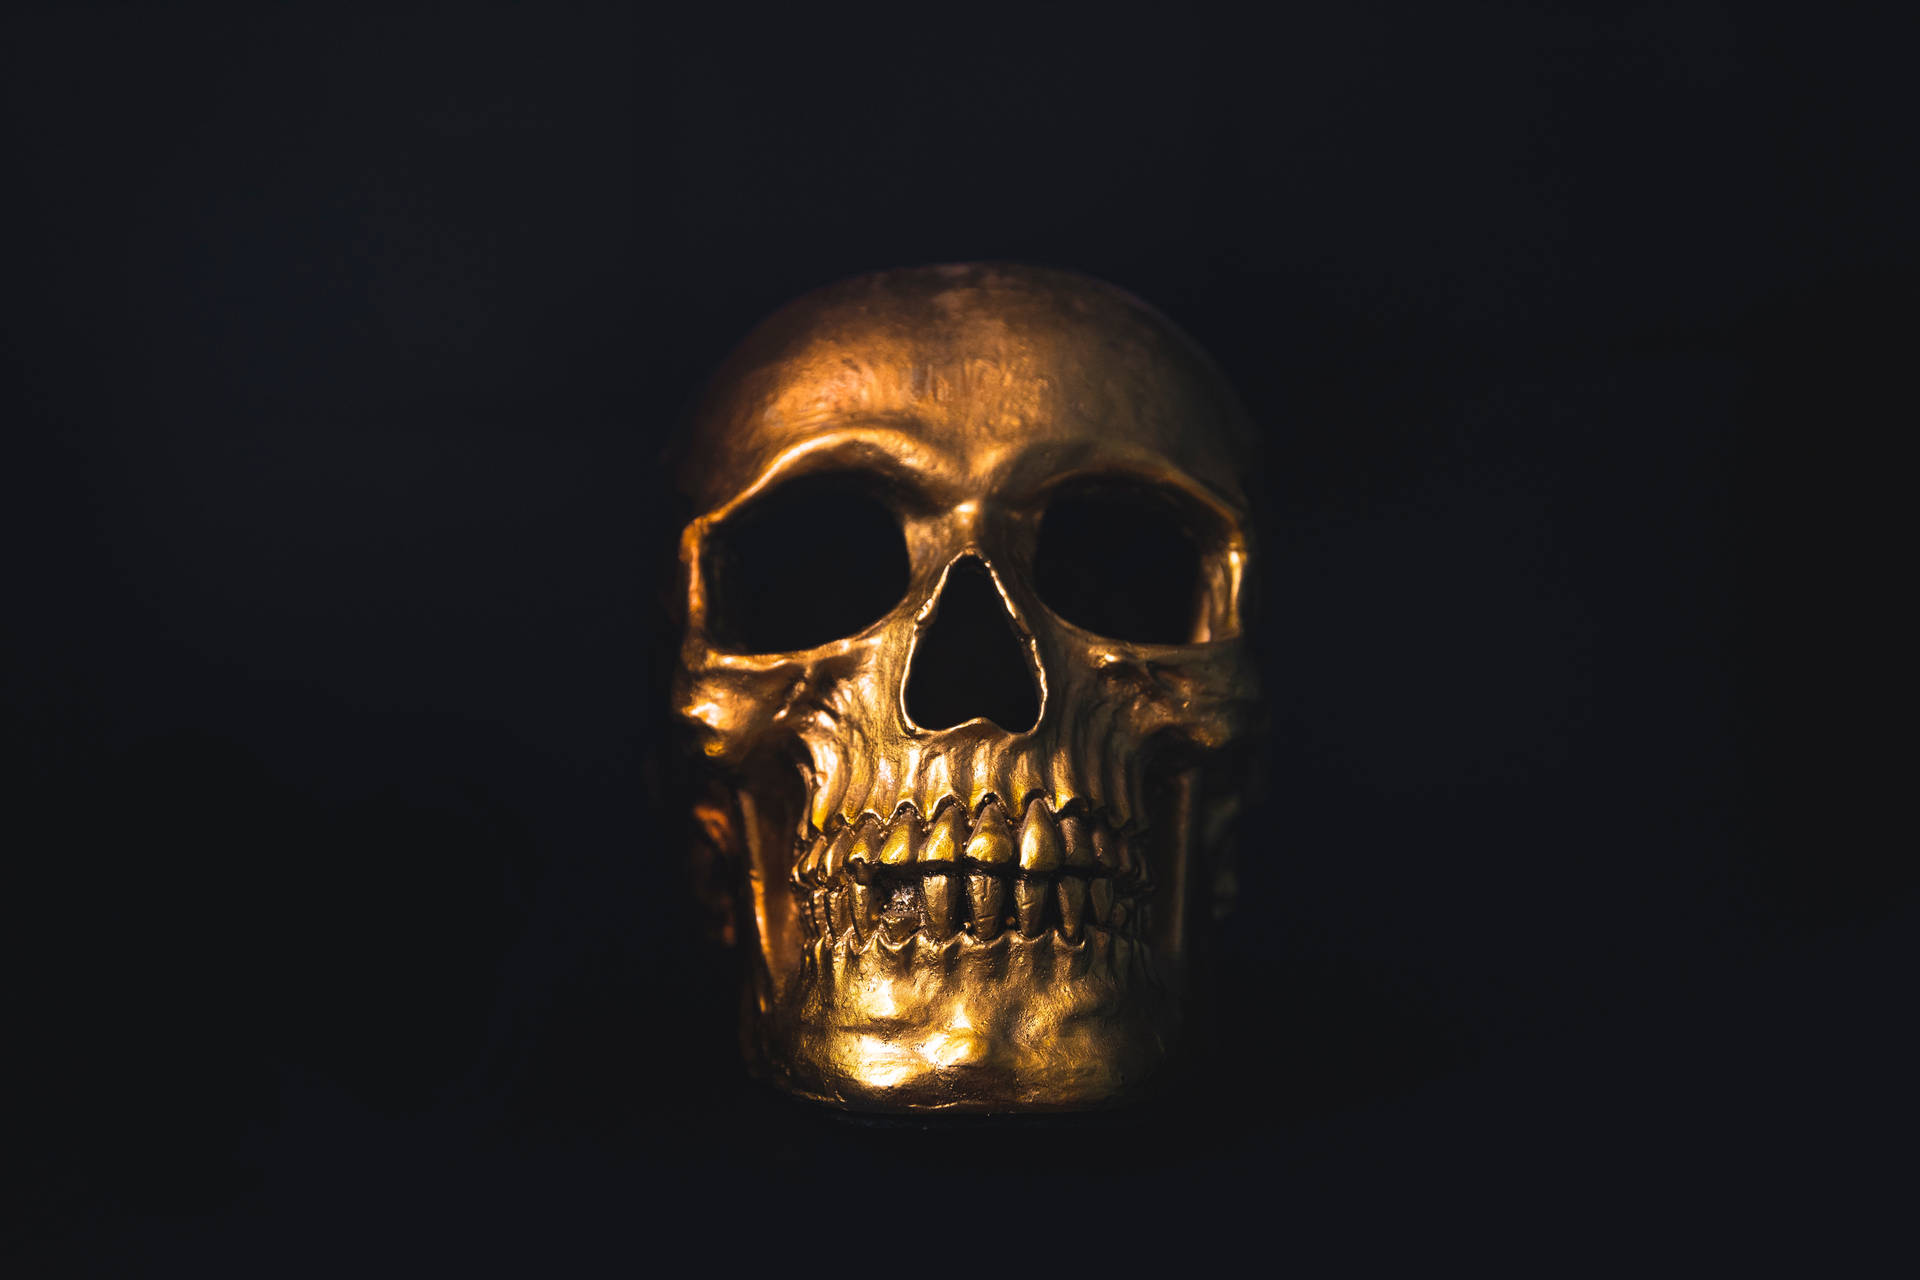 Skull 6720X4480 Wallpaper and Background Image